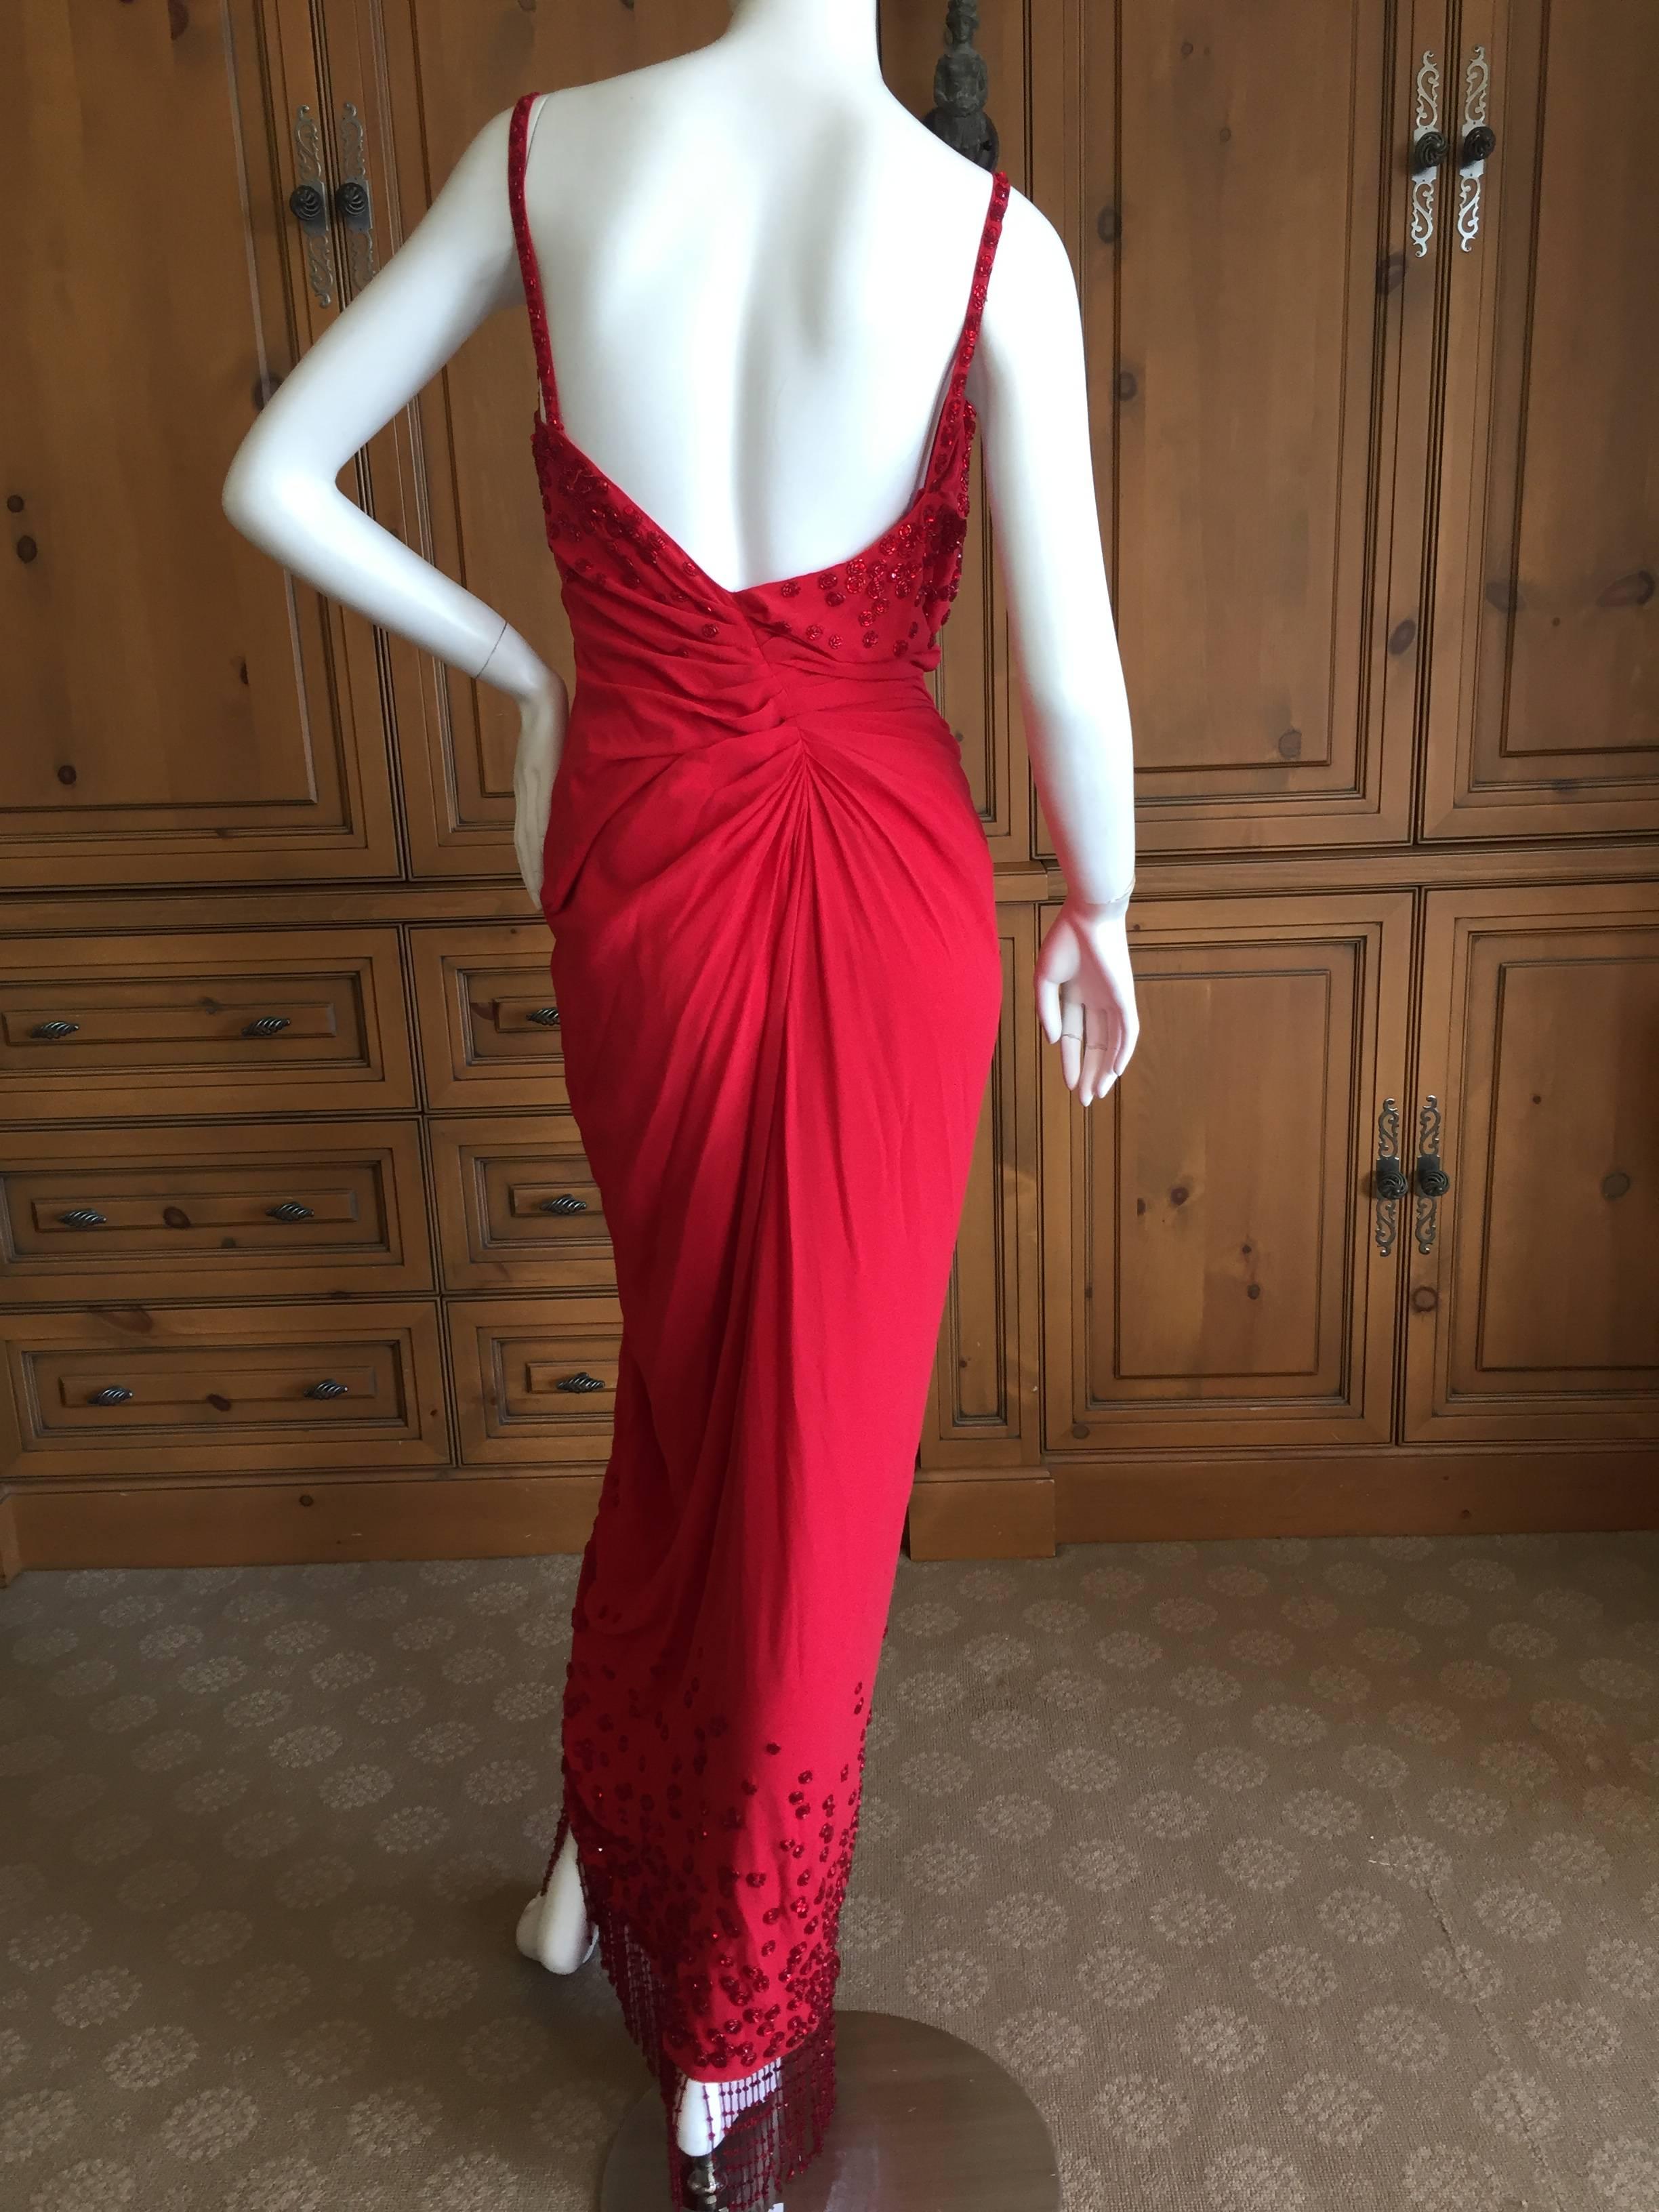 Christian Dior Lady in Red Fringed Beaded Evening Dress by Galliano 3